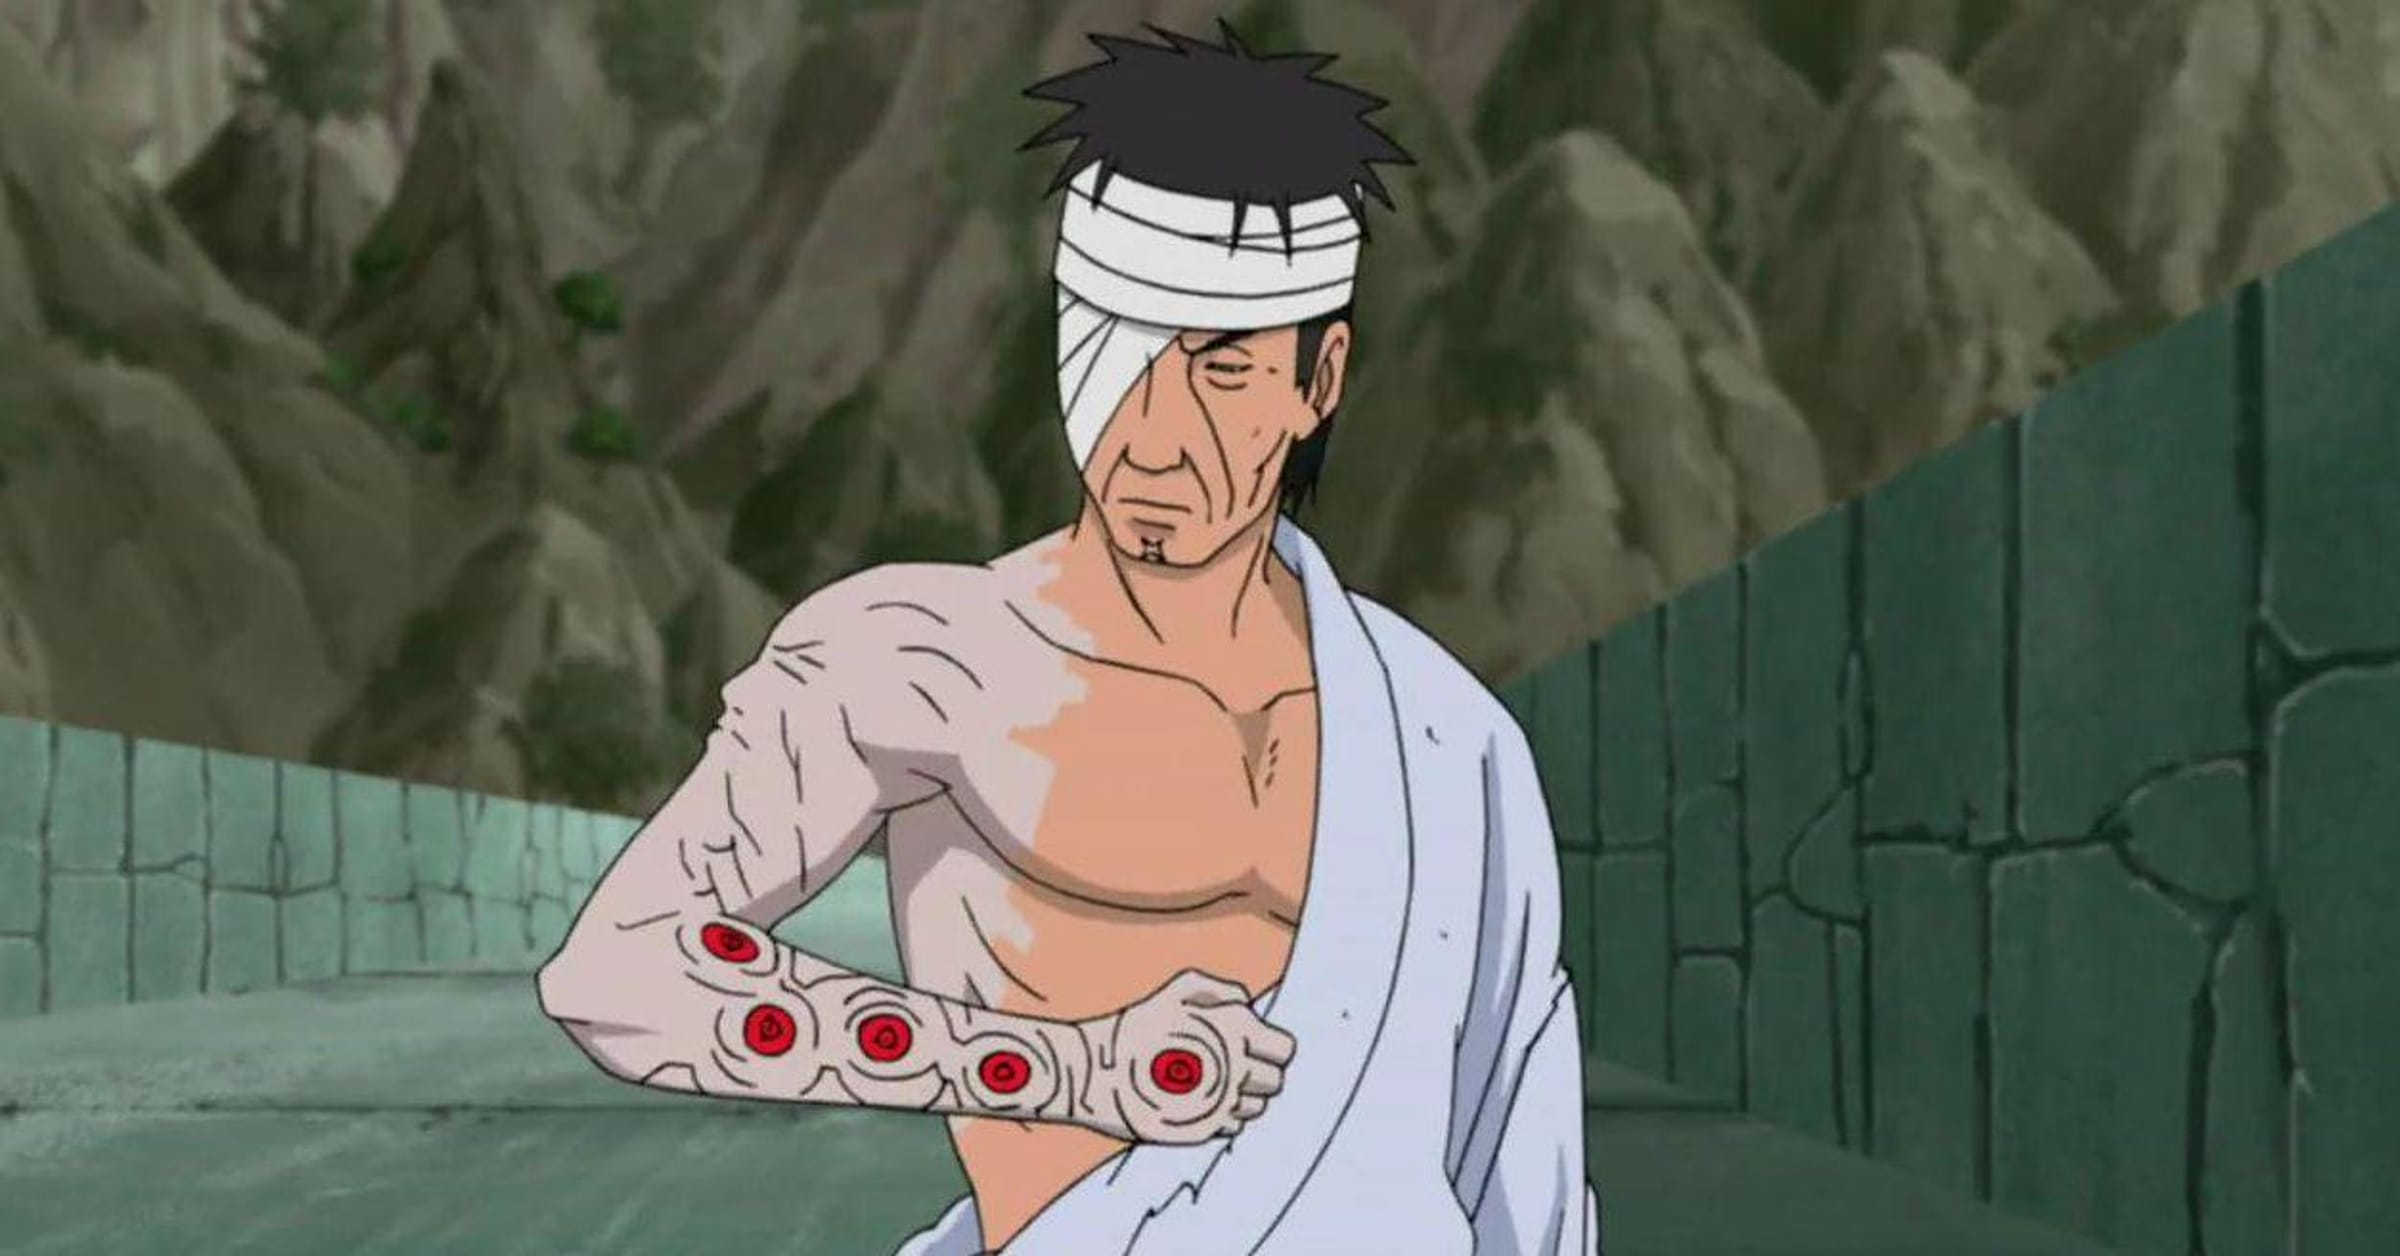 10 Naruto characters who never deserved the hate they got